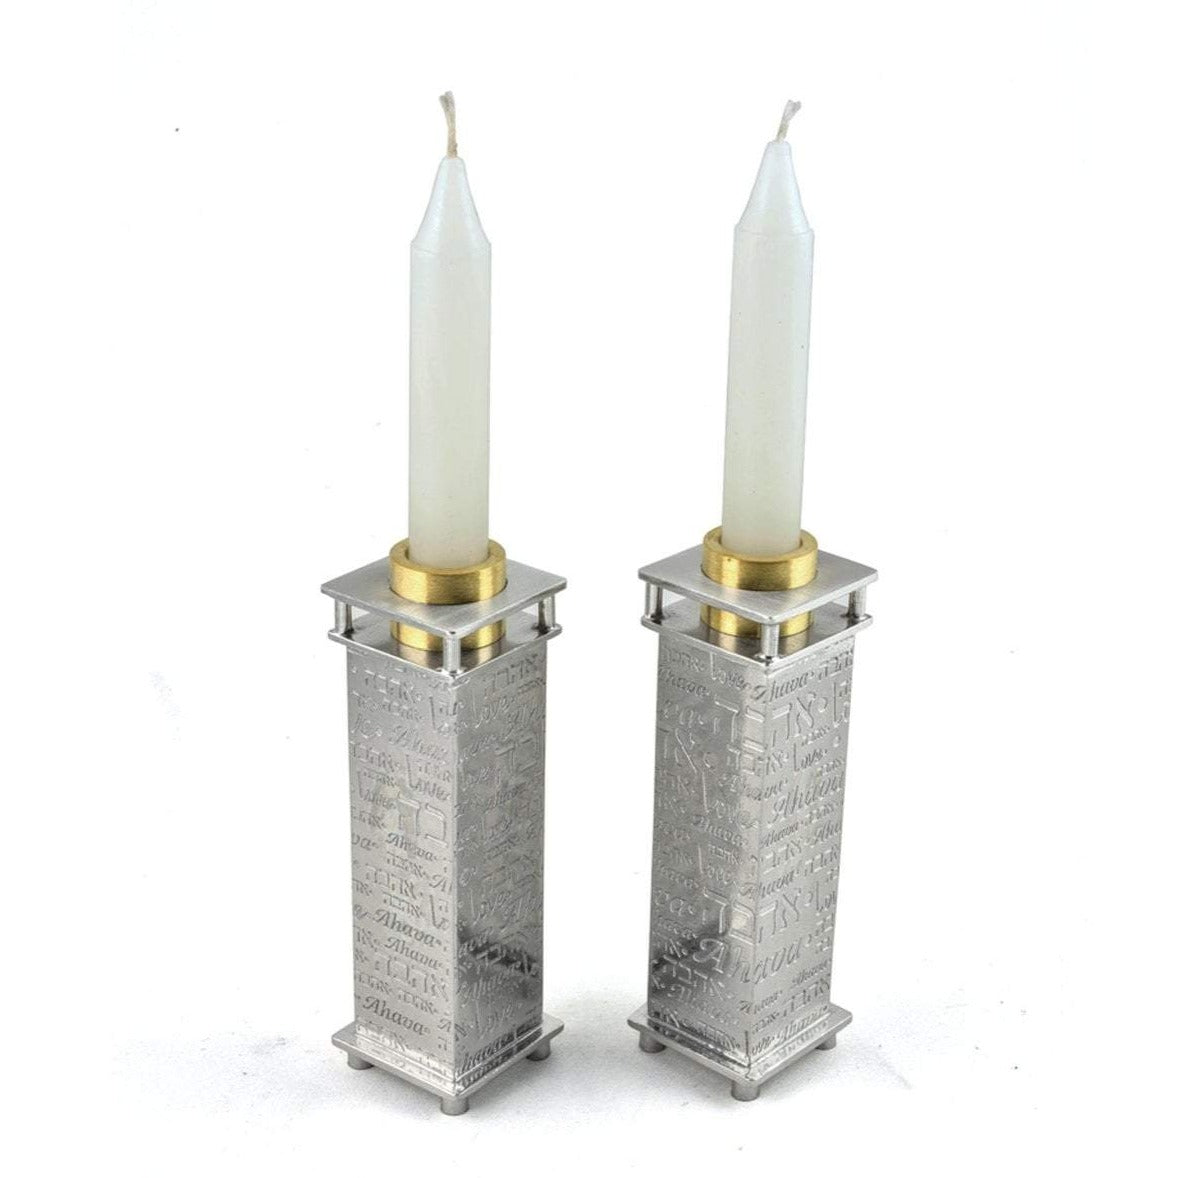 Joy Stember Candlesticks Ahava Collection Square Candle Holders by Joy Stember